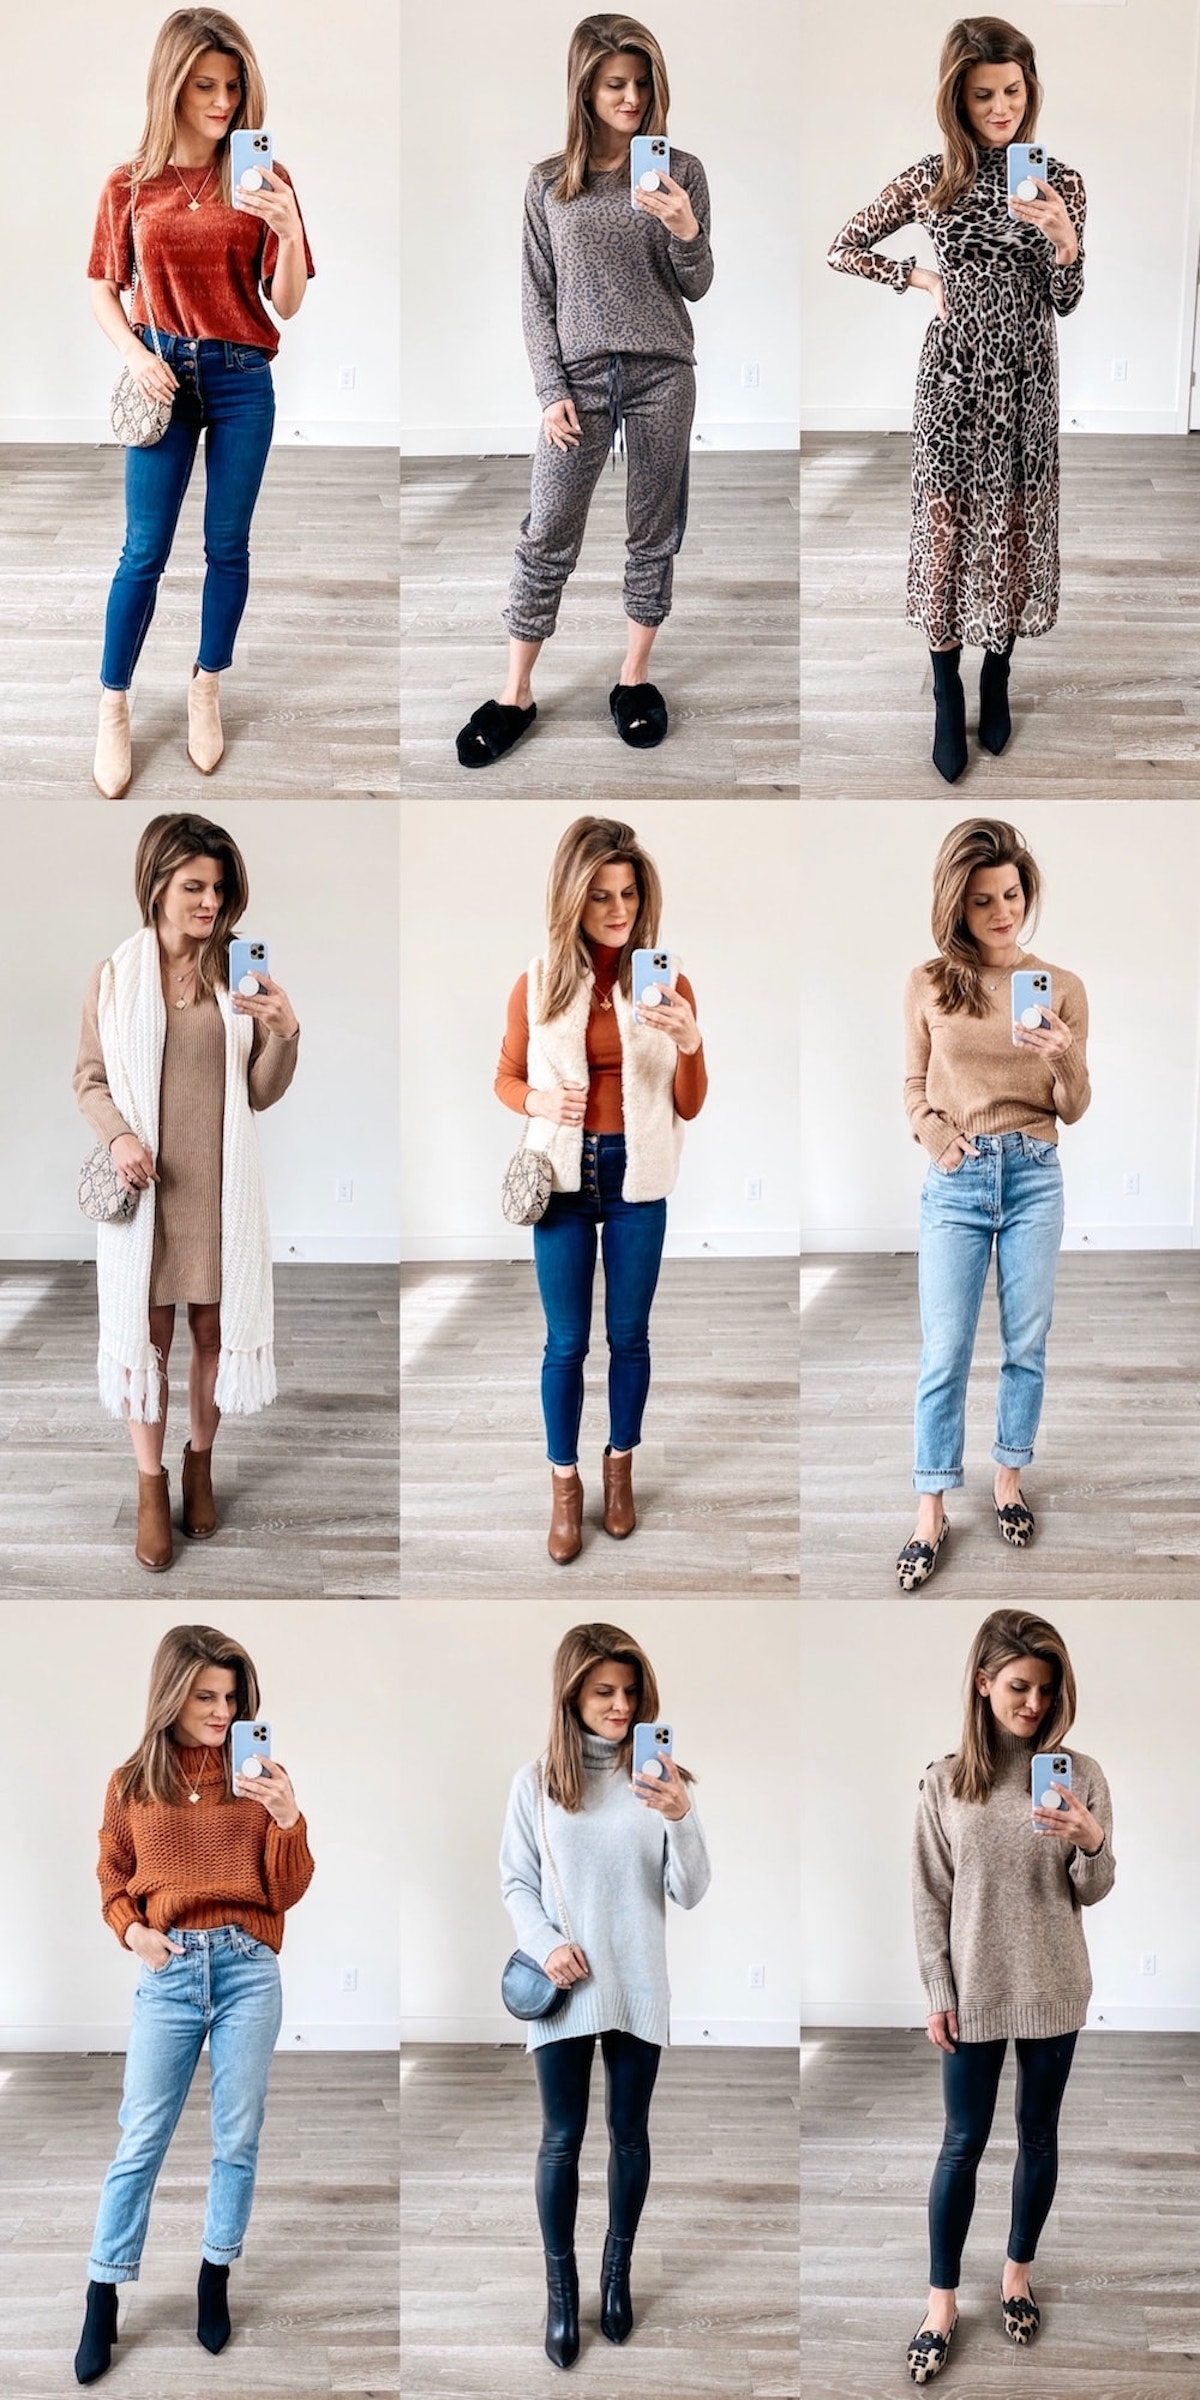 https://www.brightontheday.com/wp-content/uploads/2019/11/thanksgiving-outfit-ideas-2019-collage.jpg